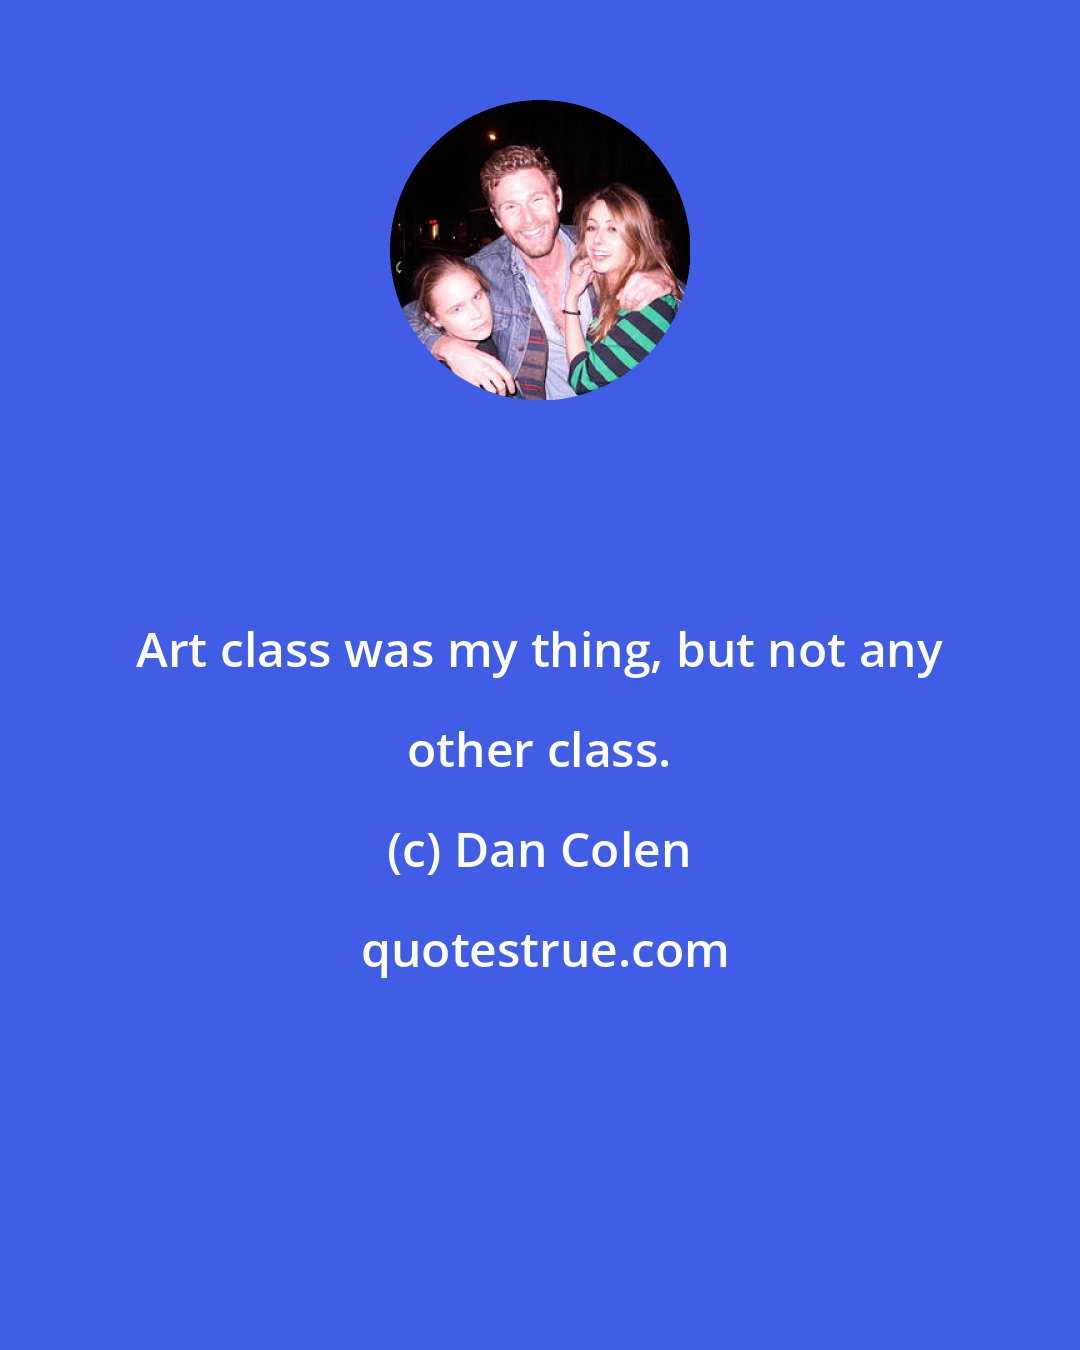 Dan Colen: Art class was my thing, but not any other class.